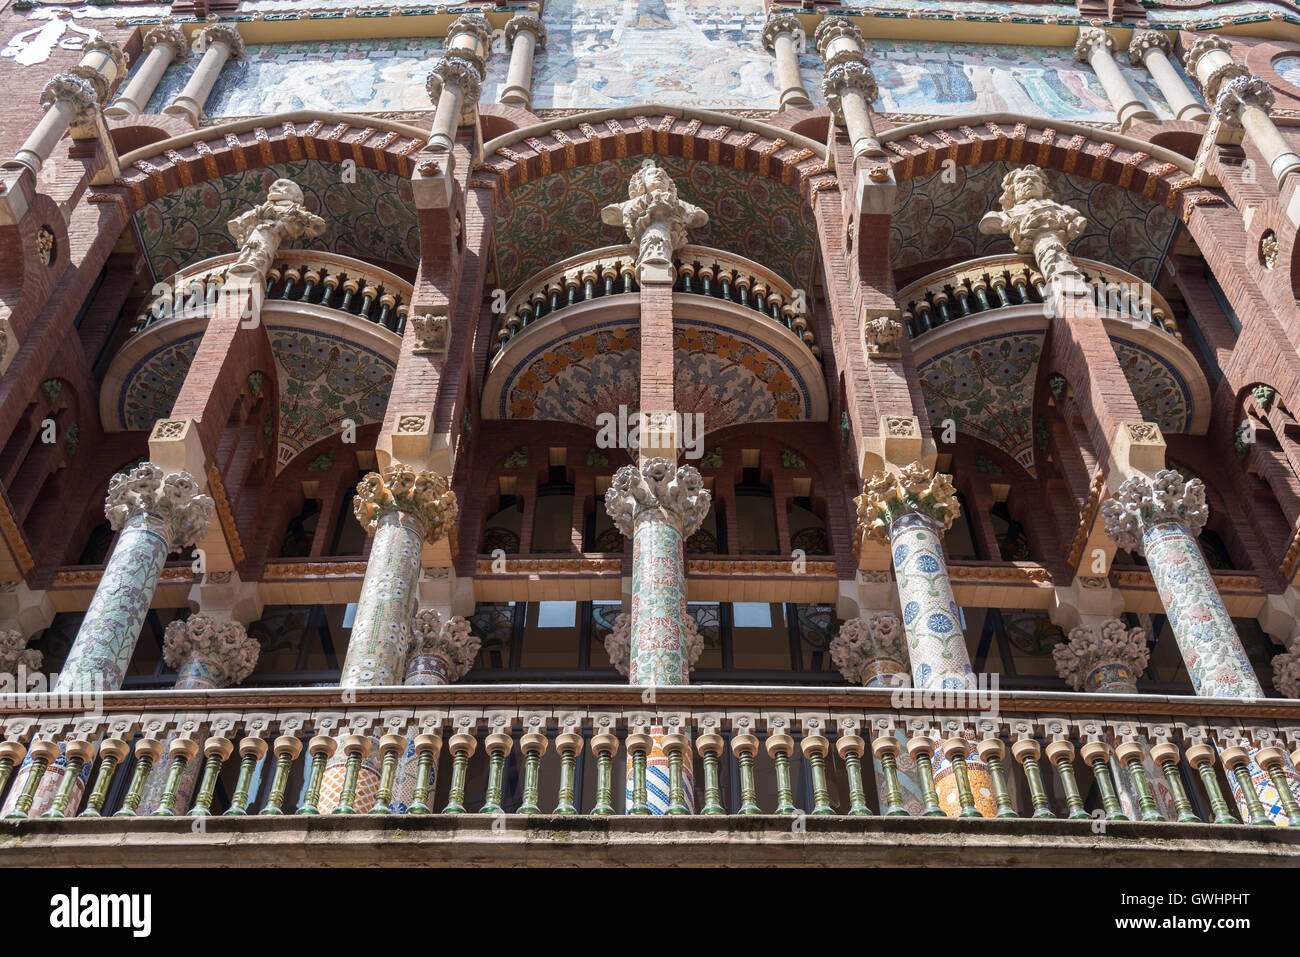 The lavish interior of the Palau de la Musica Catalana, with it's ornate stained glass, decorated stonework and creative design. Stock Photo